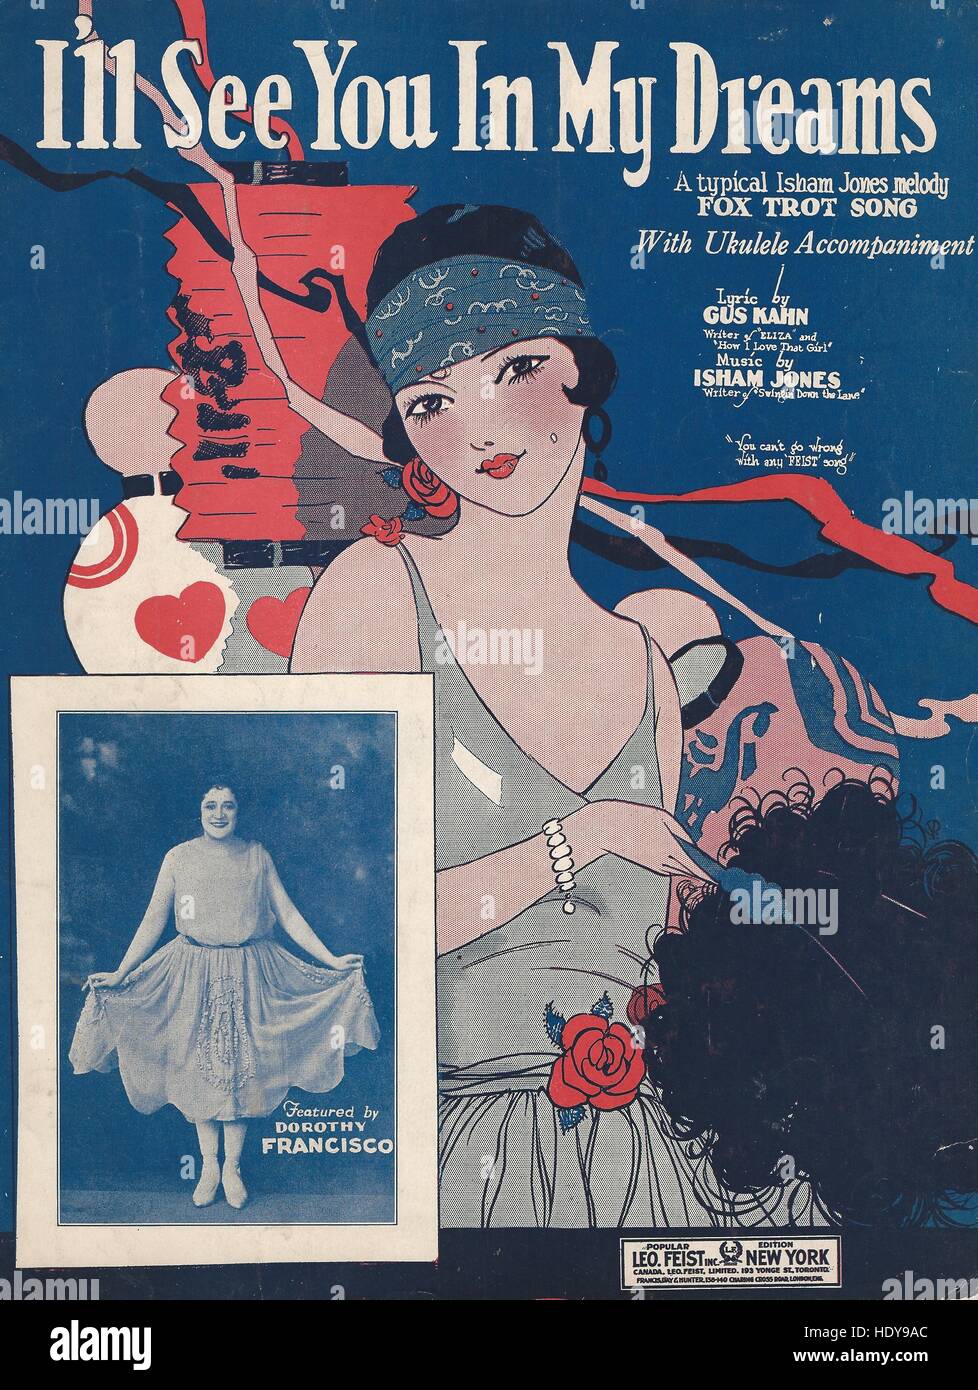 'I'll See You in My Dreams' 1924 Sheet Music Cover Stock Photo